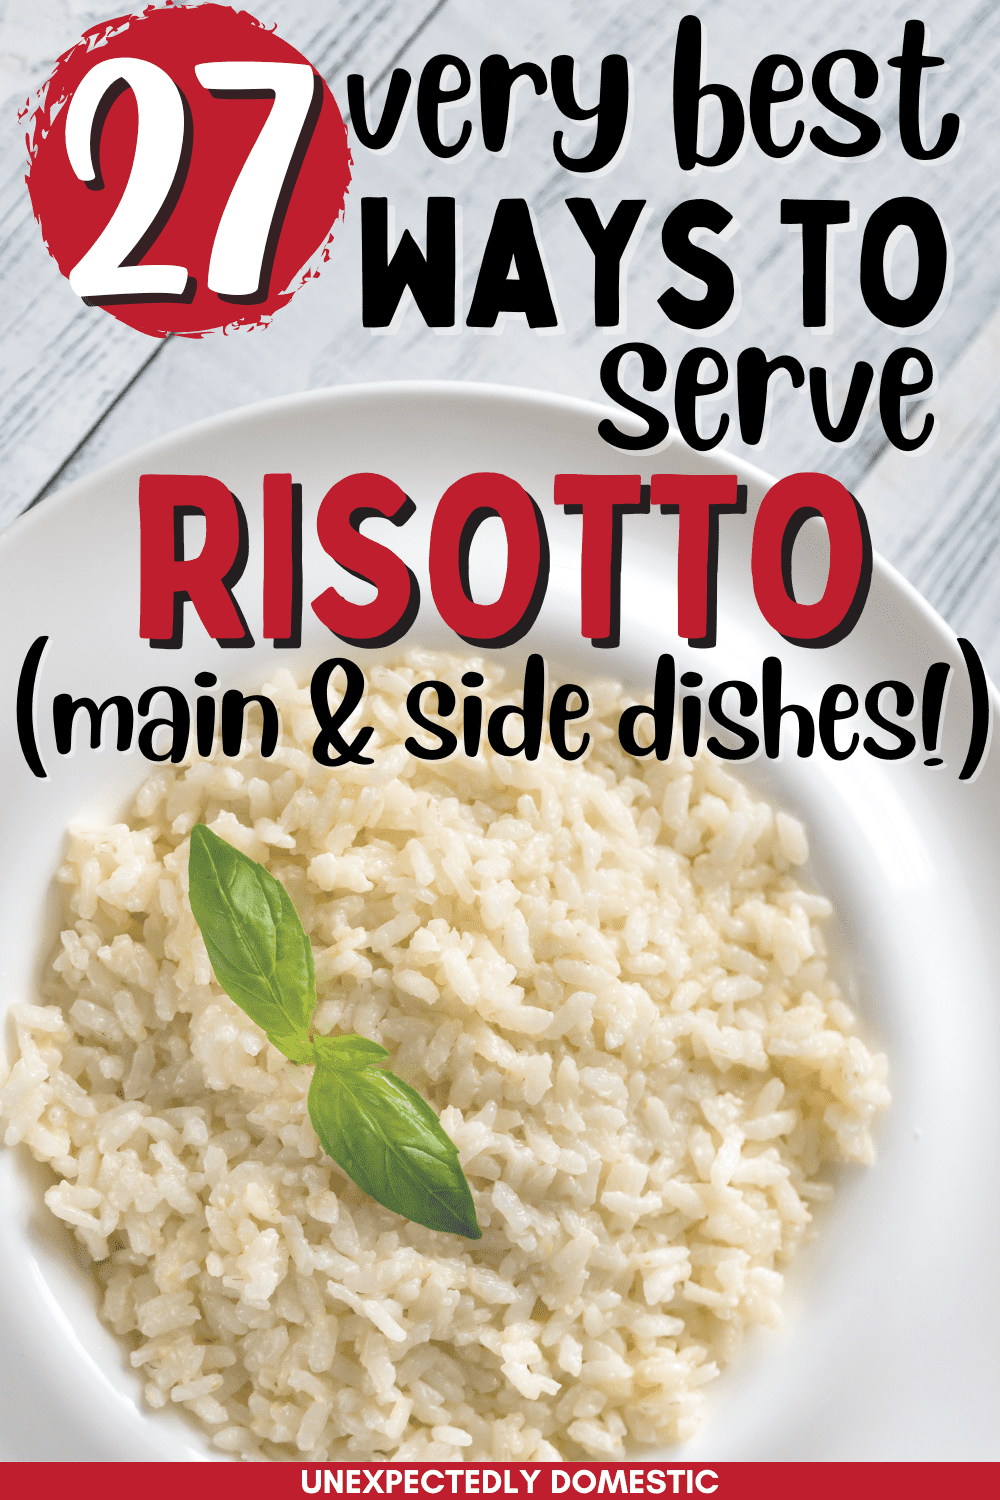 Exactly what to serve with risotto! These proteins and side dishes pair well with risotto for a uniquely special meal.